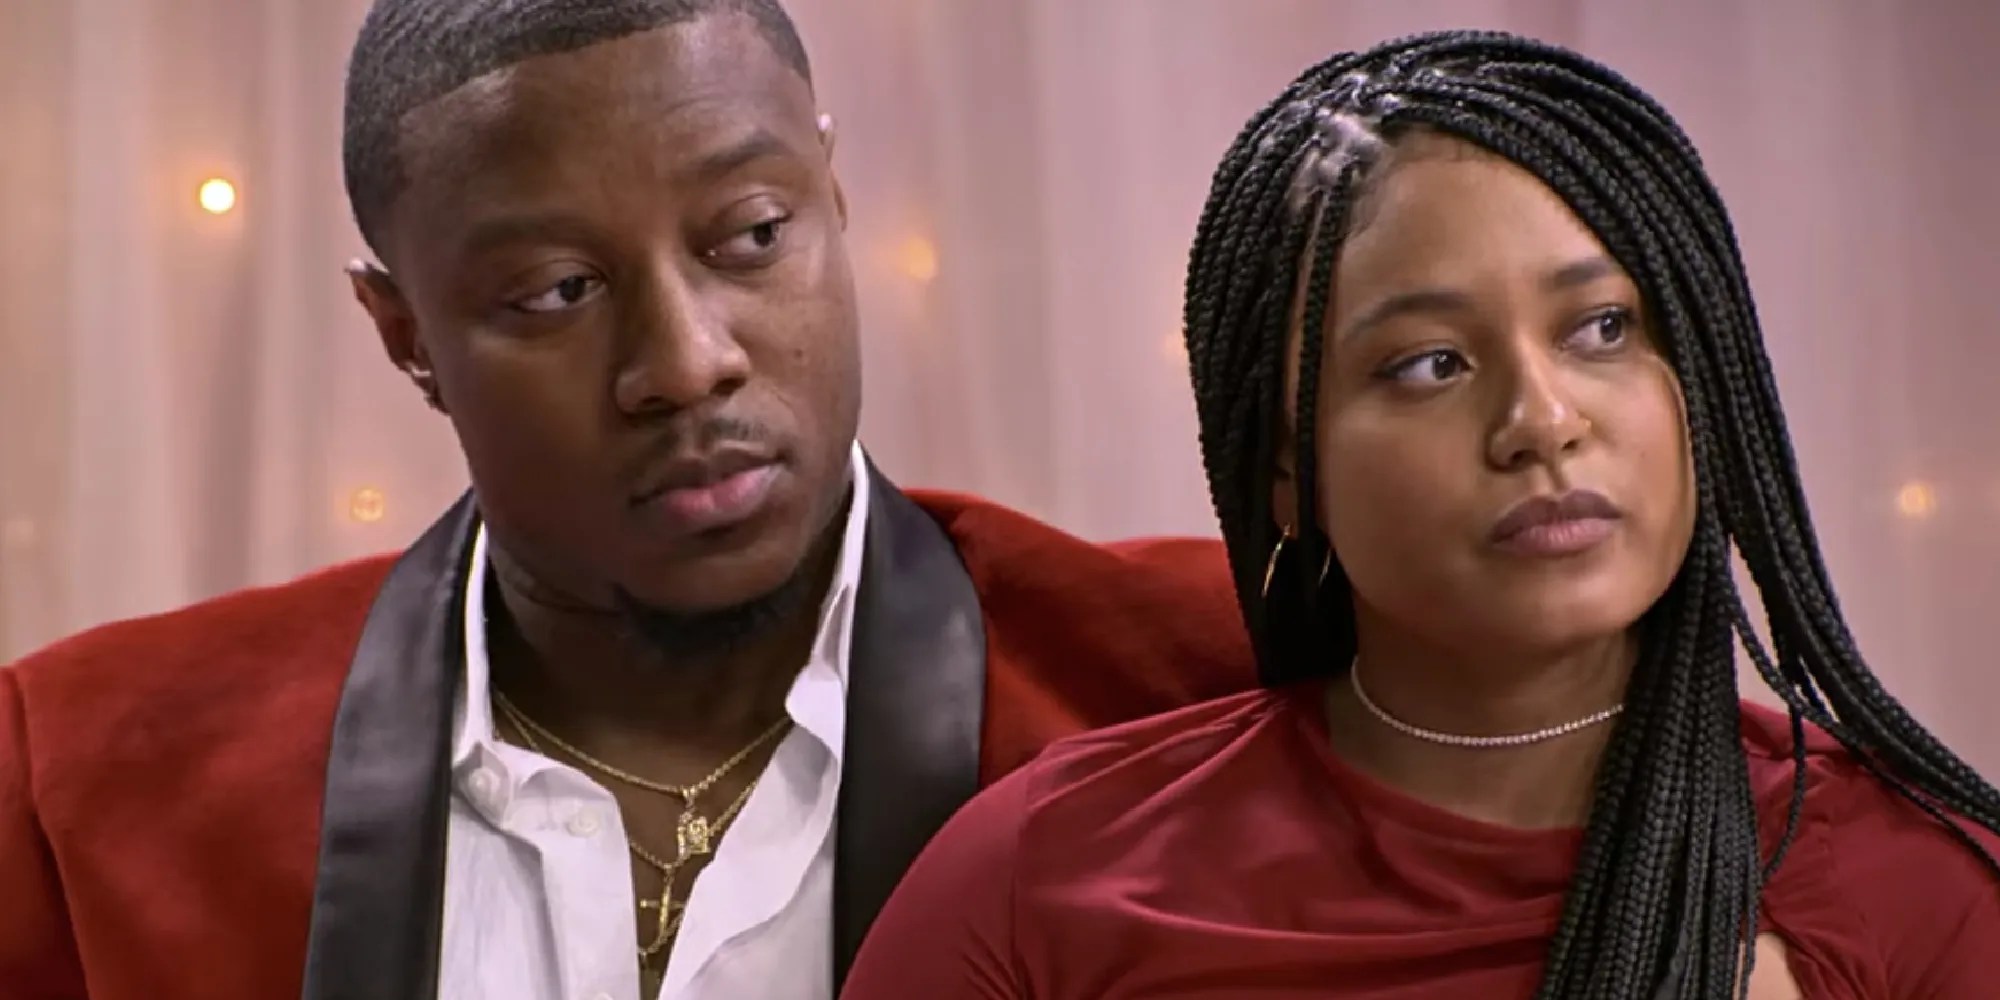 What Love Is Blind's Jarrette's Been Up To Since Divorce From Iyanna